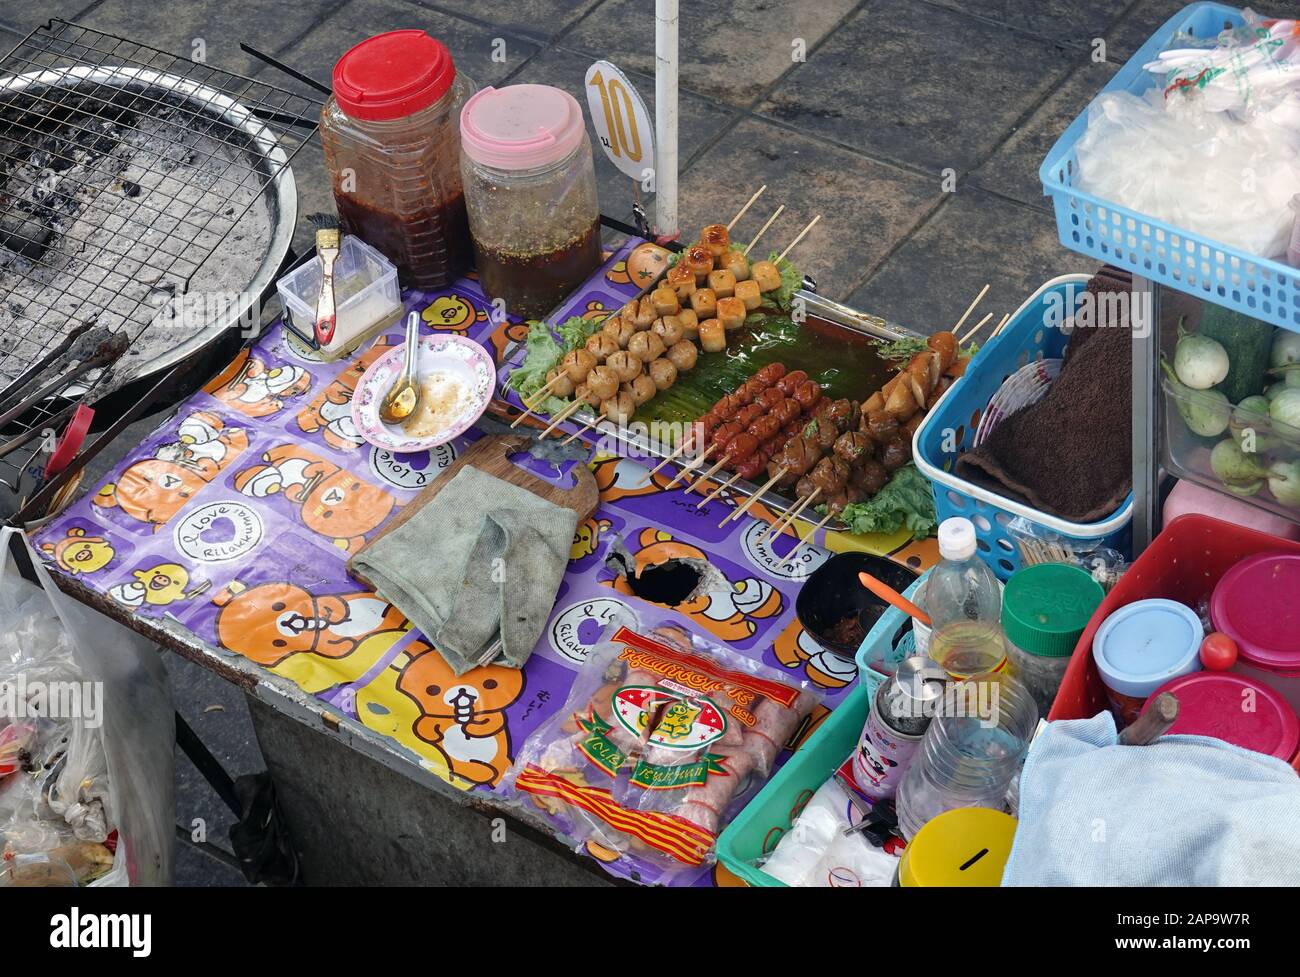 Bangkok, Thailand - December 20, 2019: Street food stall with sausages, meat and tofu balls. Stock Photo